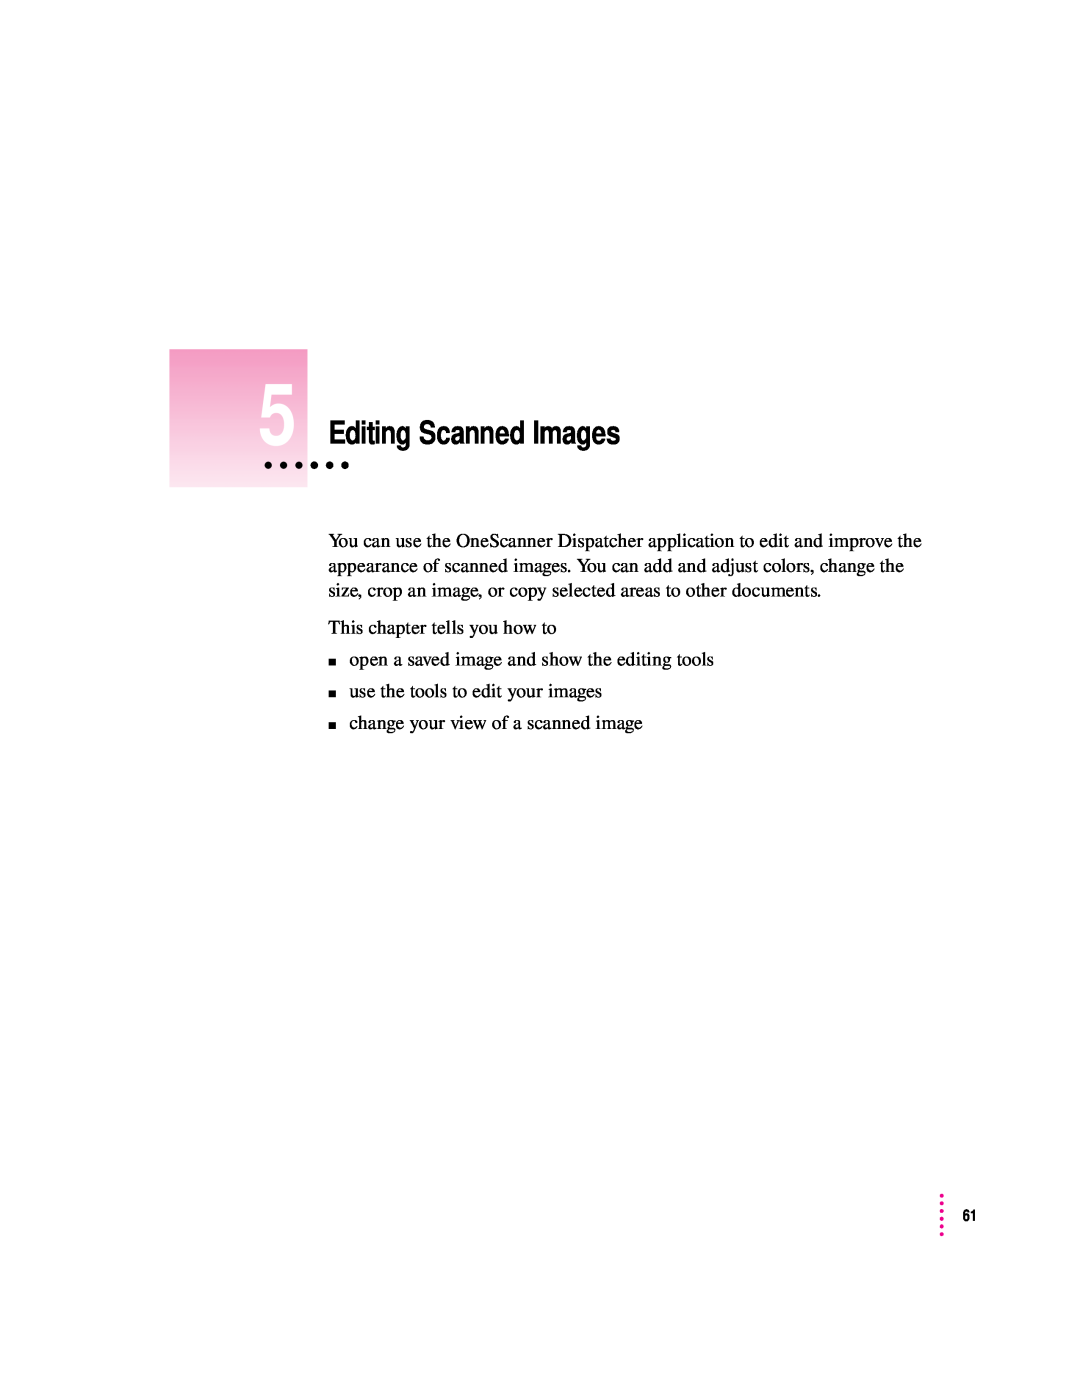 Apple 1230, 627 Editing Scanned Images, This chapter tells you how to, m open a saved image and show the editing tools 